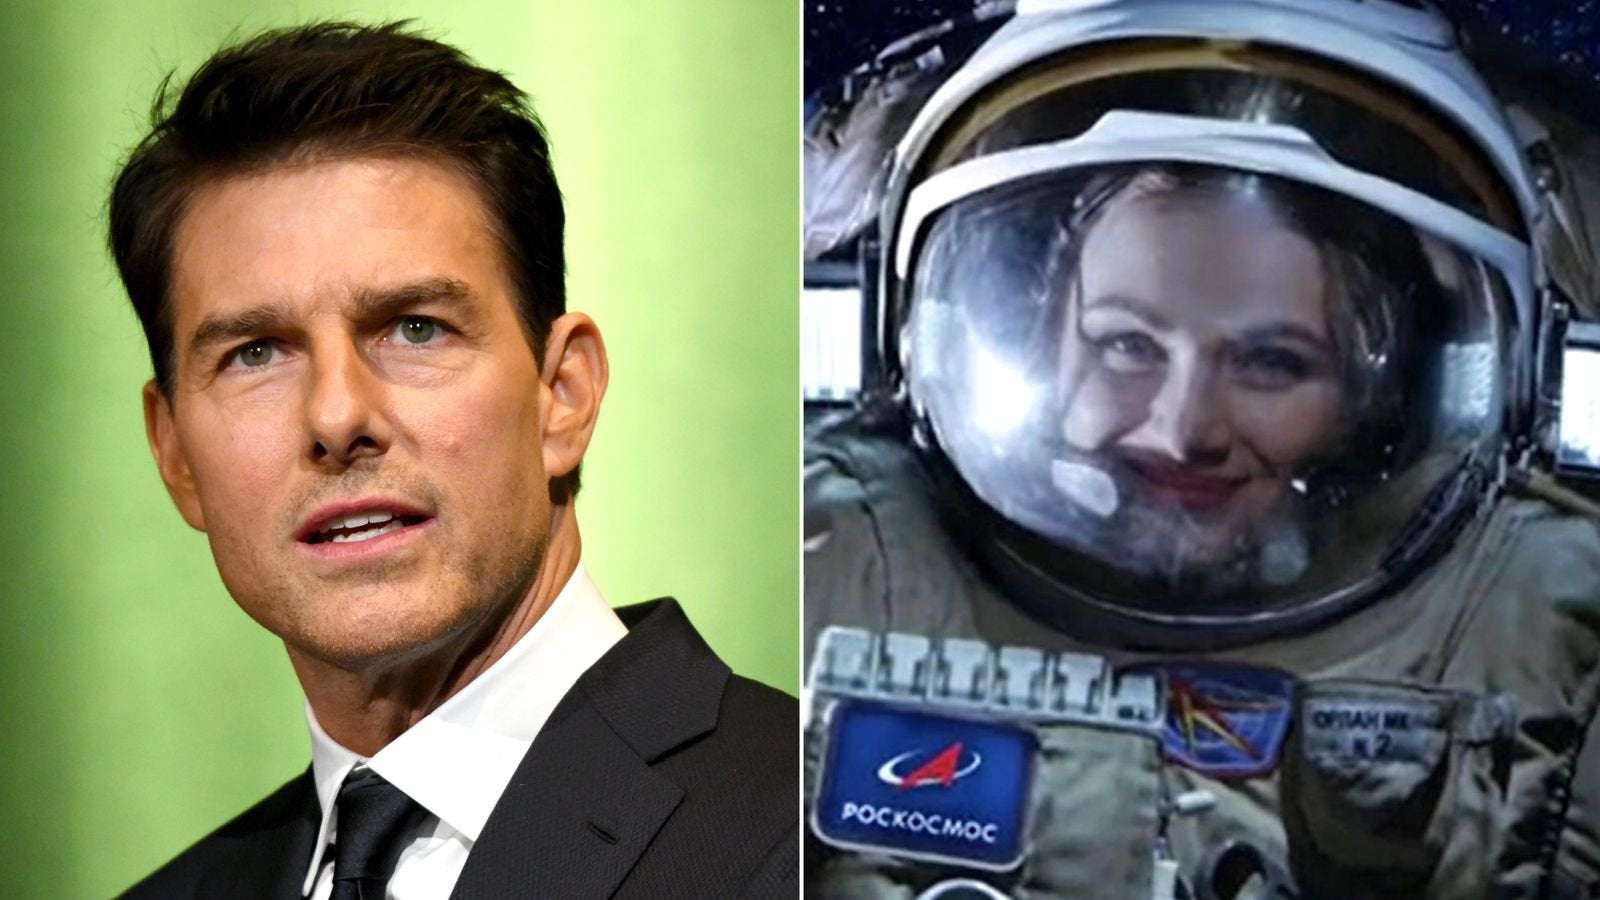 image for Russia seeks actress to send into space - in bid to beat Tom Cruise movie